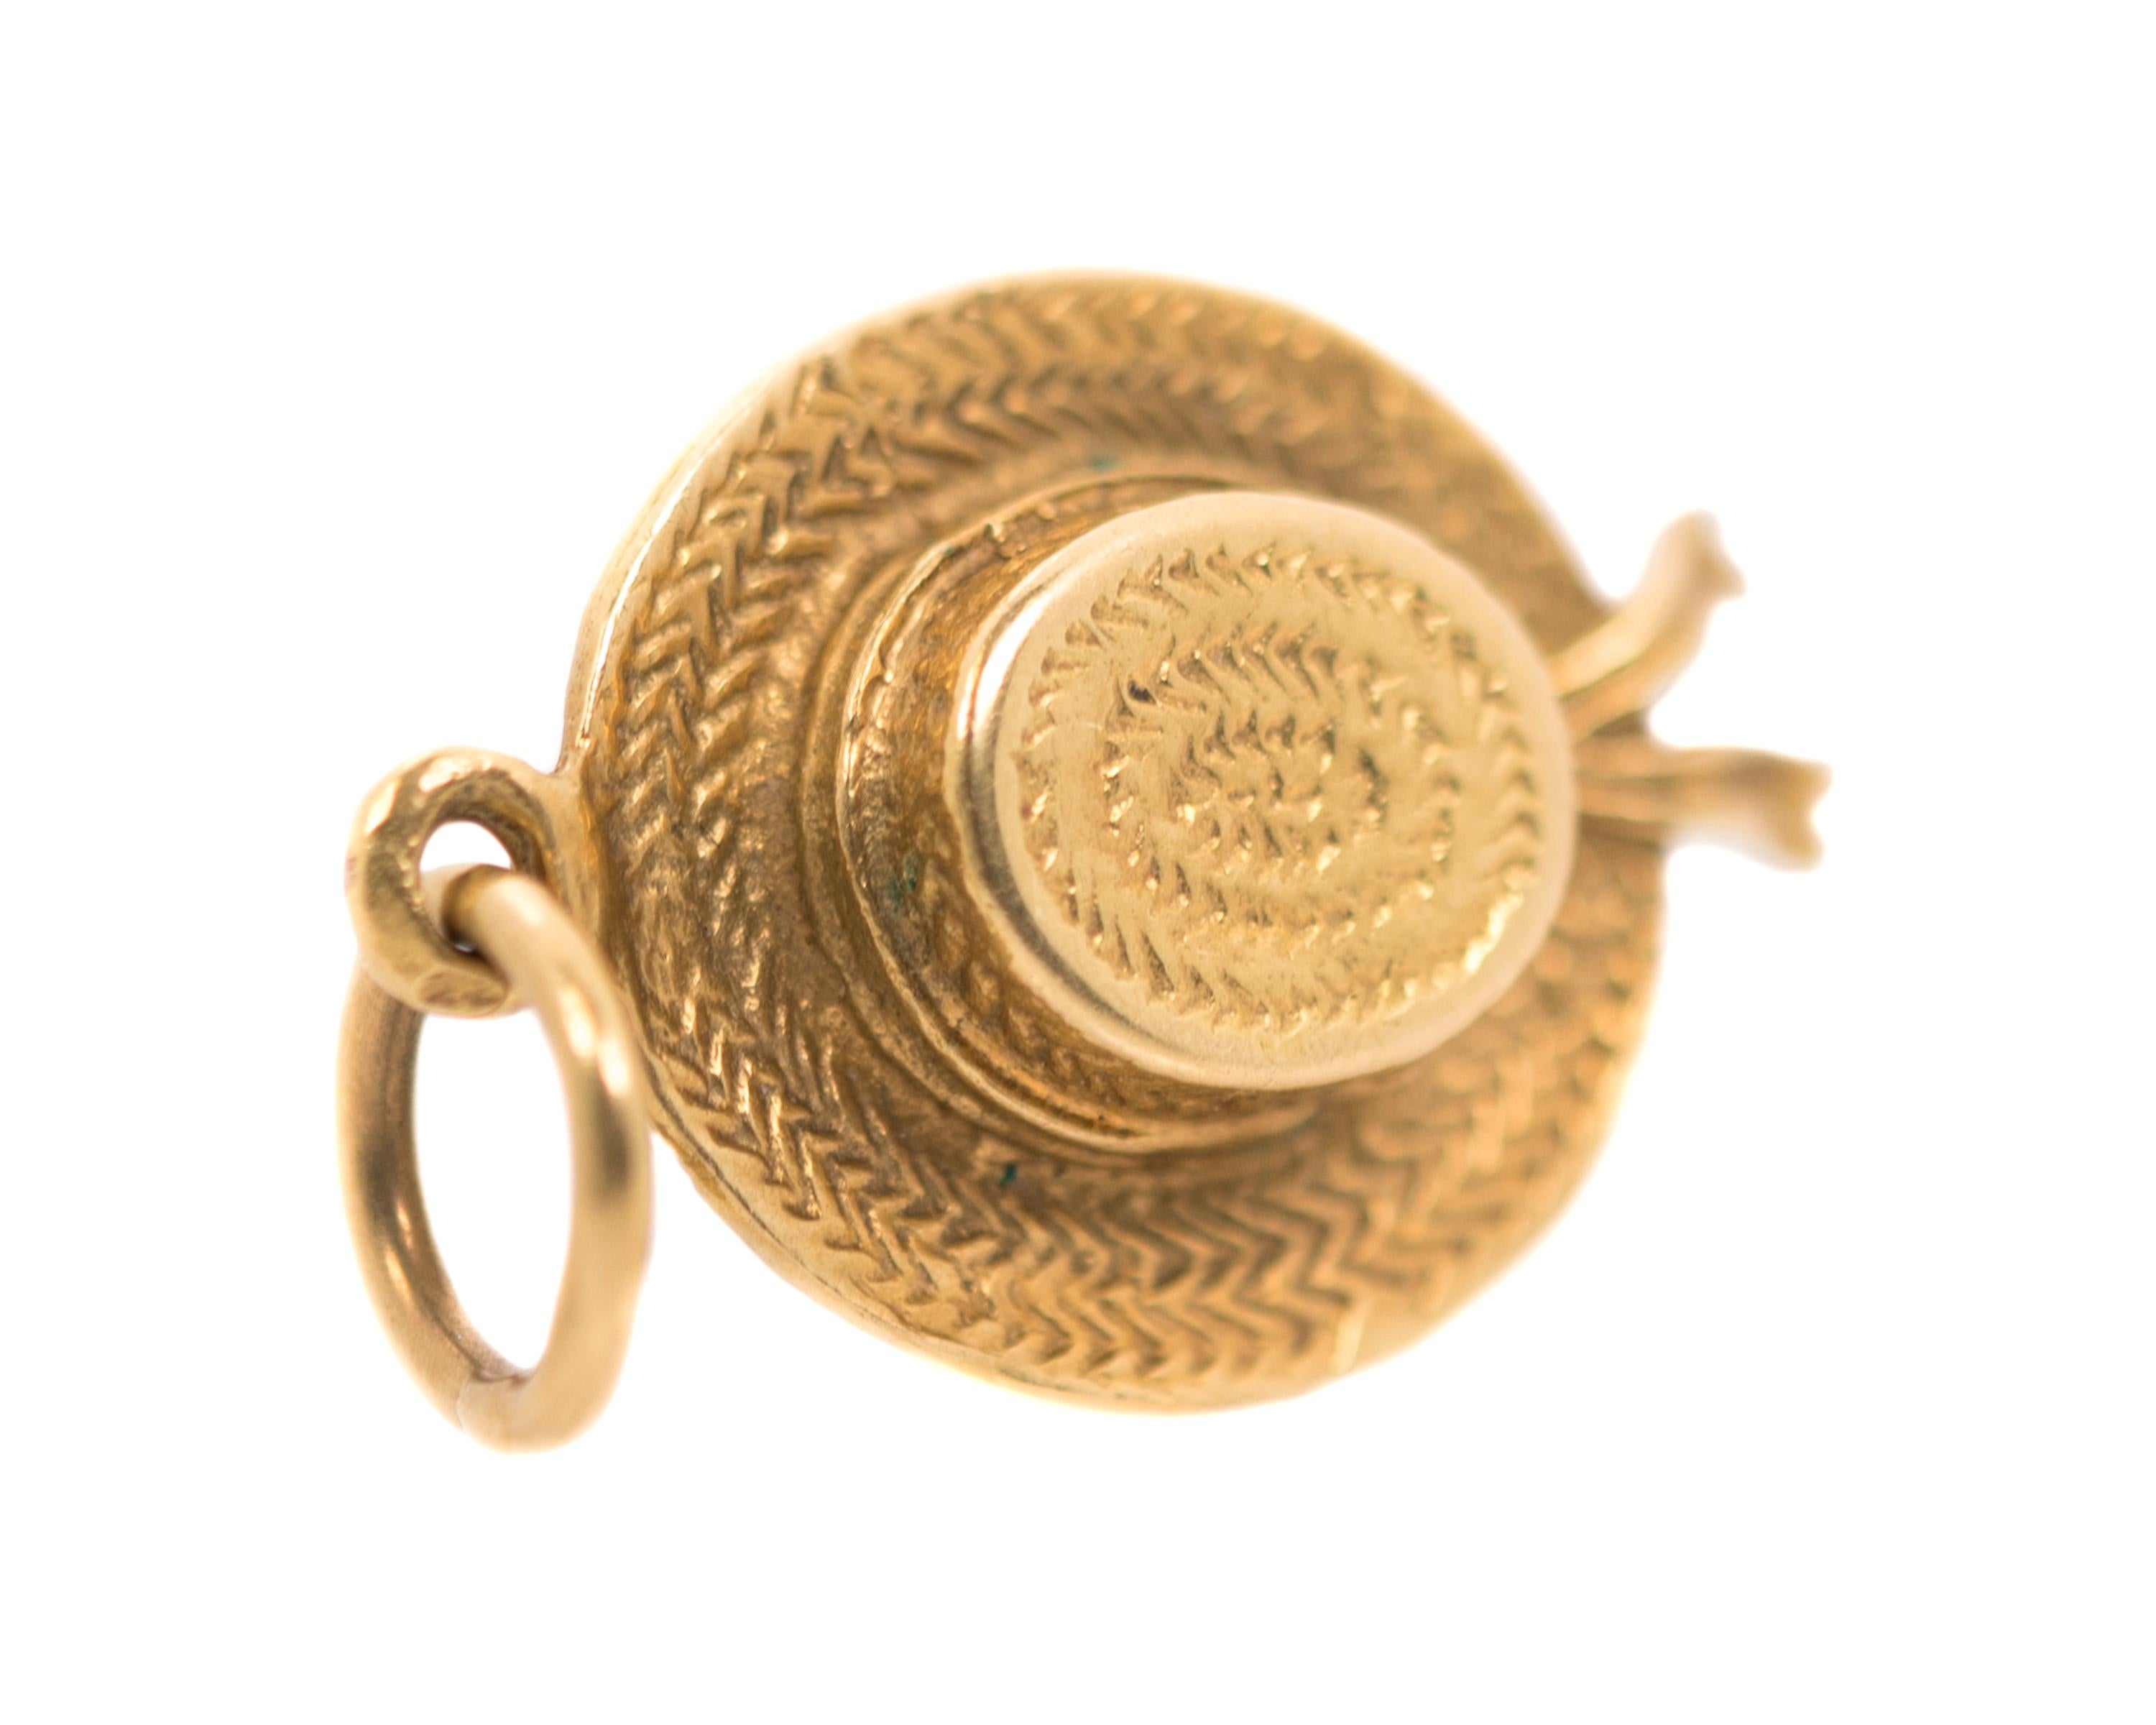 1970s Hat Pendant - 14 Karat Yellow Gold

Features: 
14 Karat Yellow Gold
Woven straw-textured gold
wrap around Gold Ribbon with Bow 
fixed round bail
24 millimeters long x 16 millimeters wide

Pendant Details:
Metal: 14 Karat Yellow Gold
Weight: